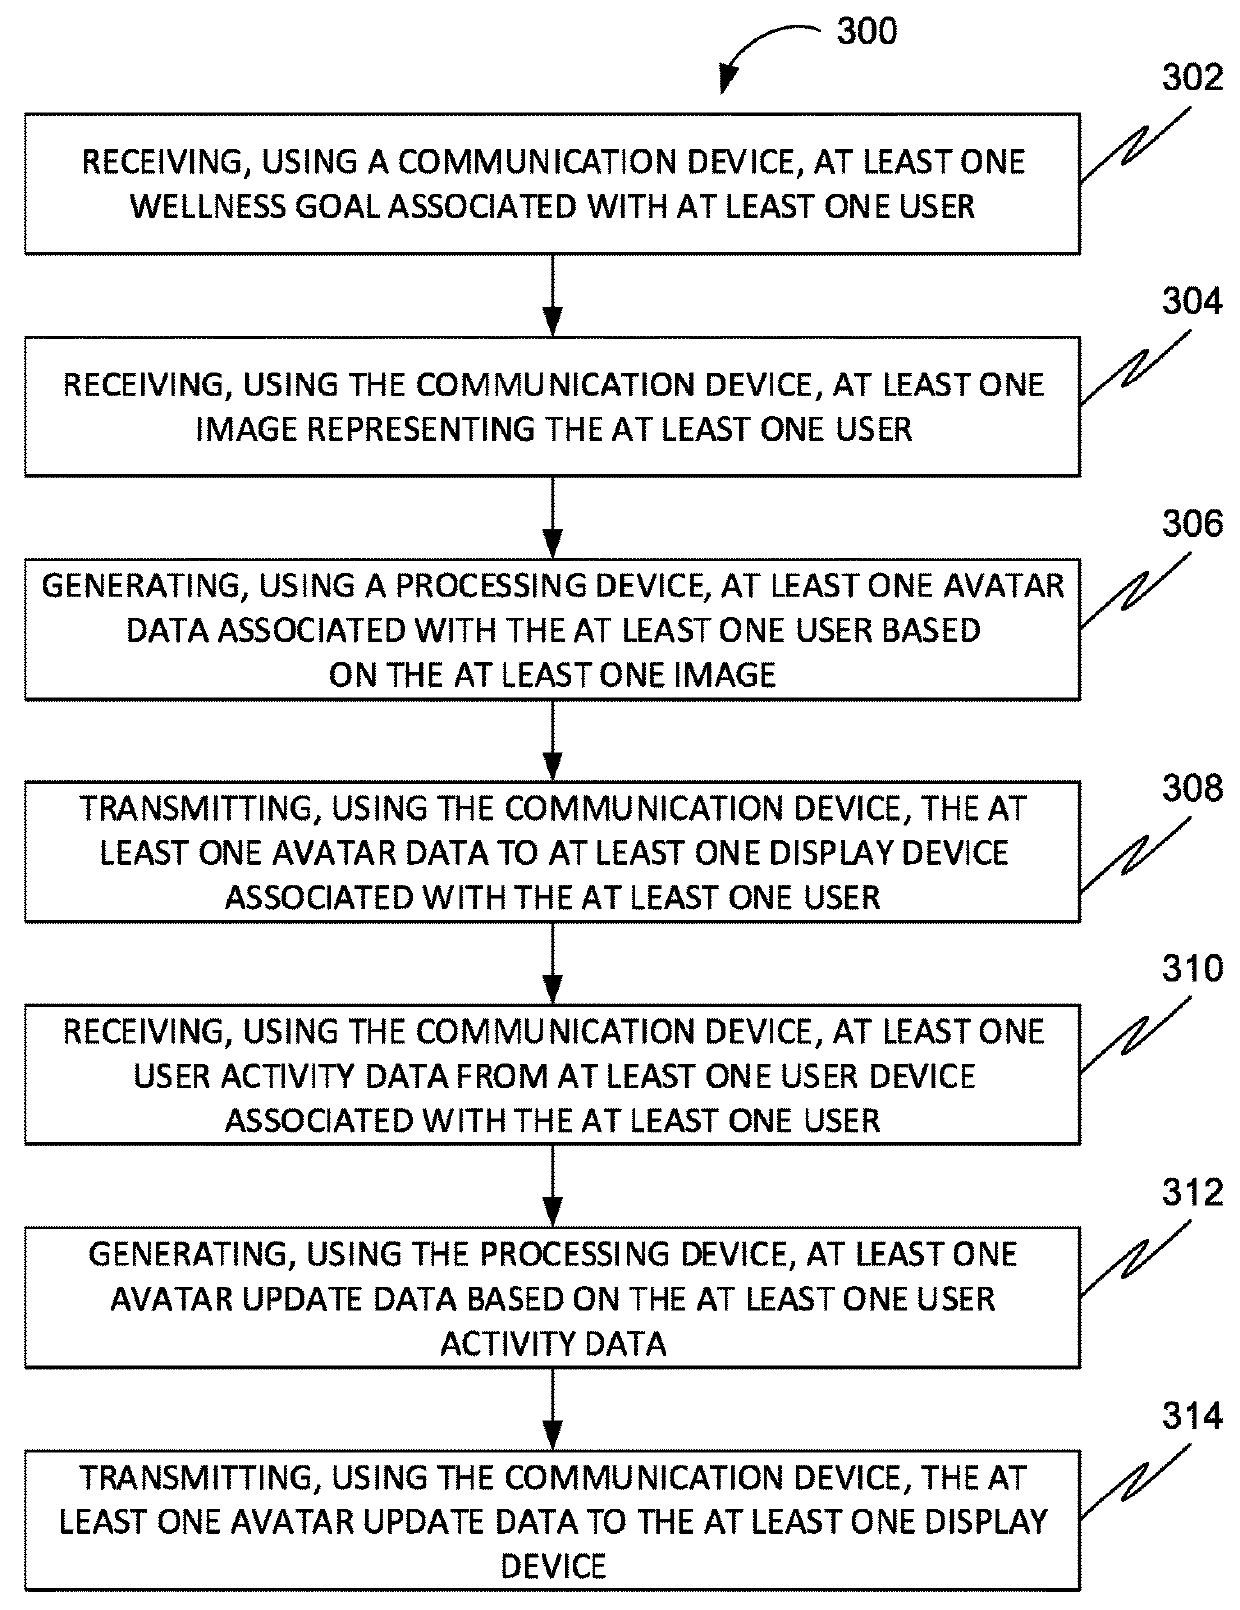 Method and system for facilitating management of wellness of users